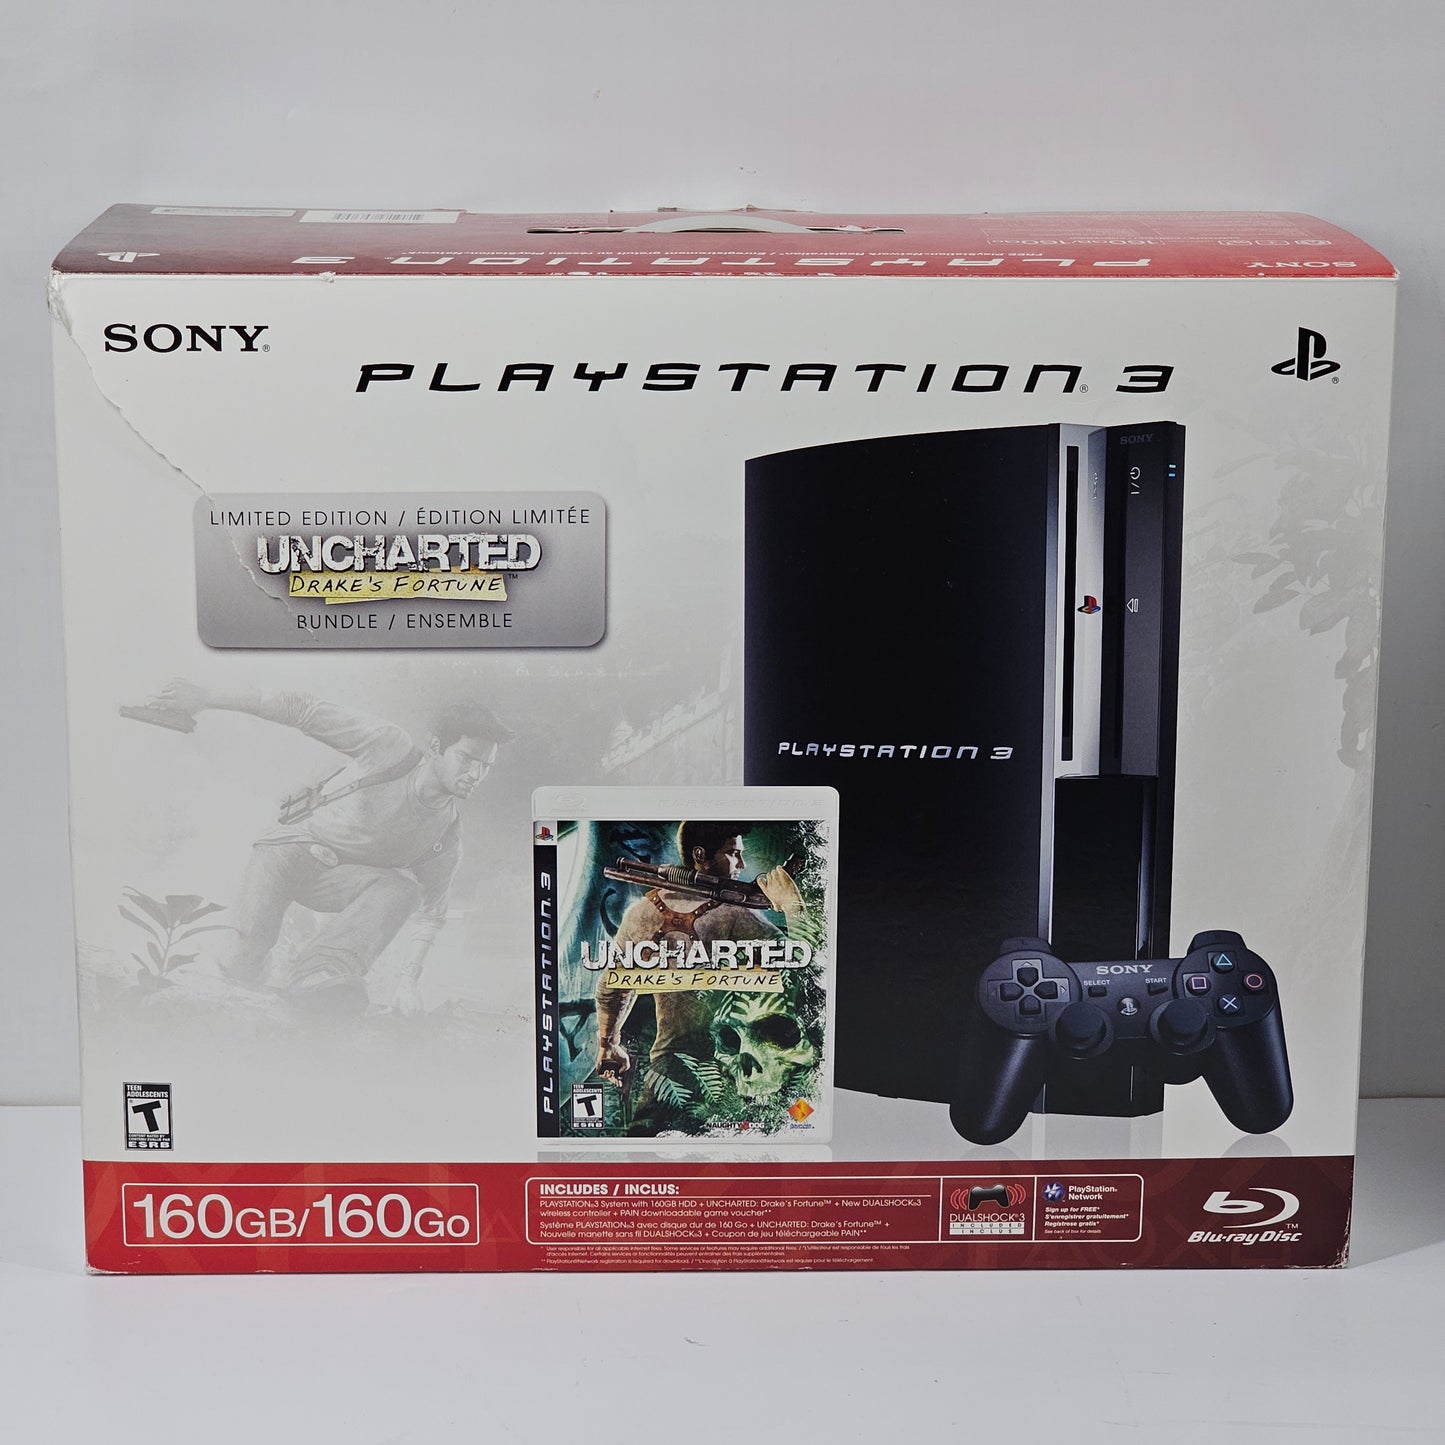 Sony PlayStation 3 PS3 160GB Console Uncharted: Drake's Fortune Bundle CECHP01